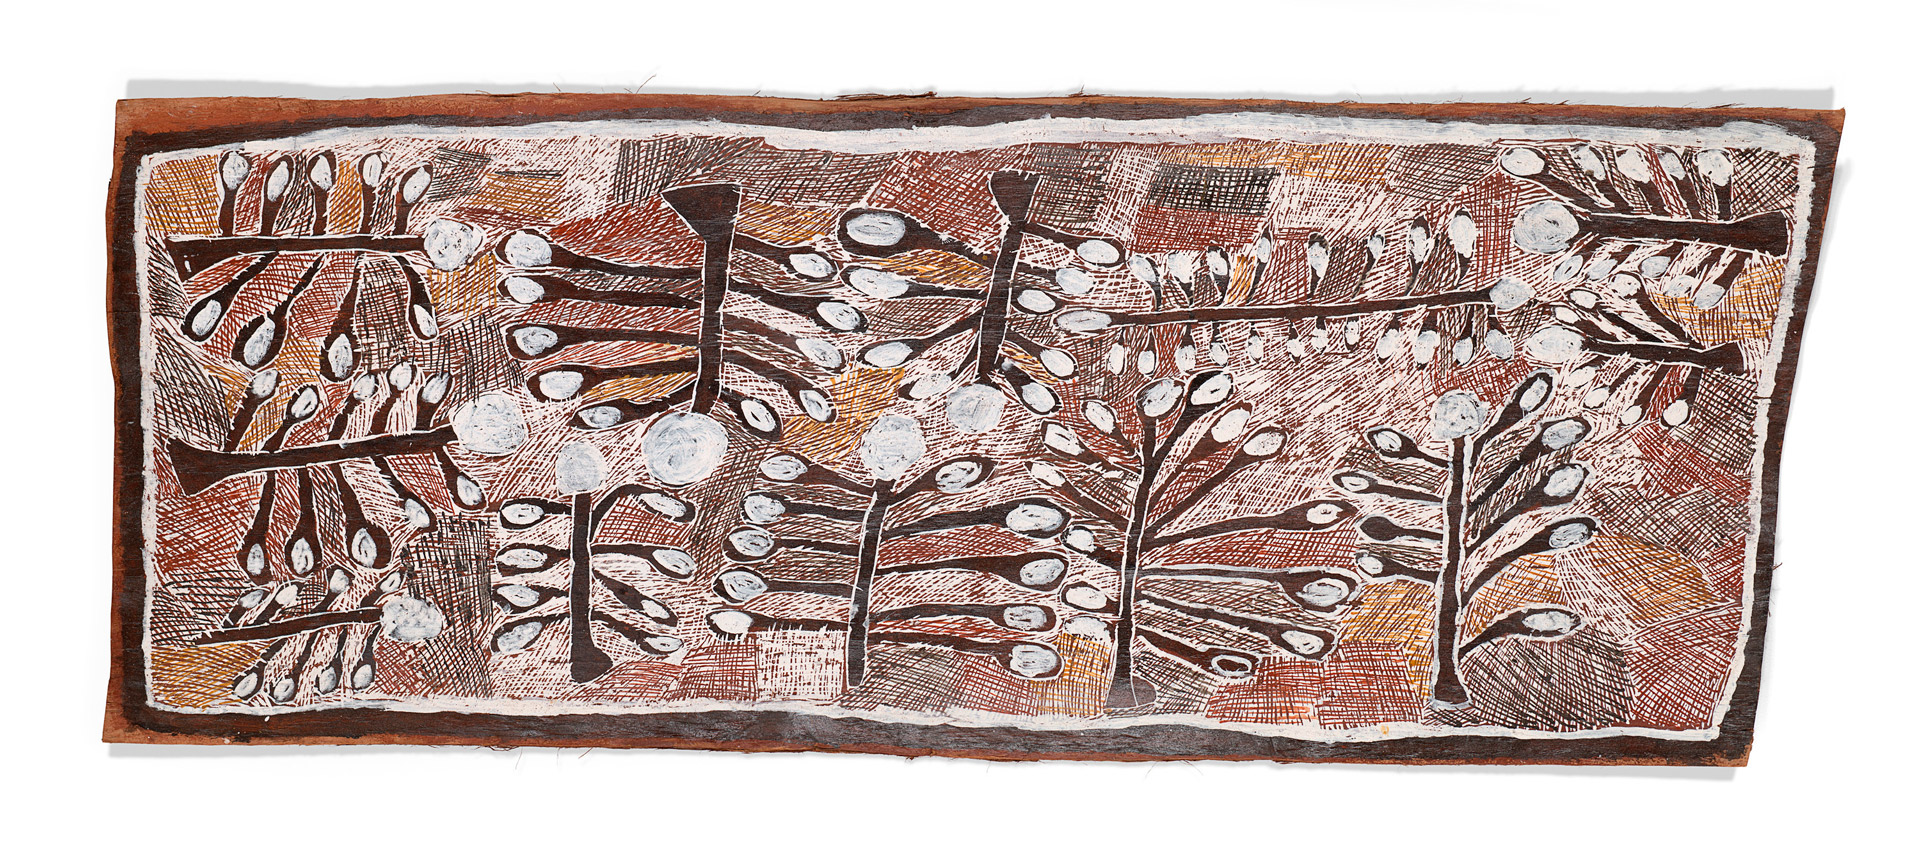 ‘Bark Ladies’: An exhibition of work by the Yolŋu women of Arnhem Land to open at NGV